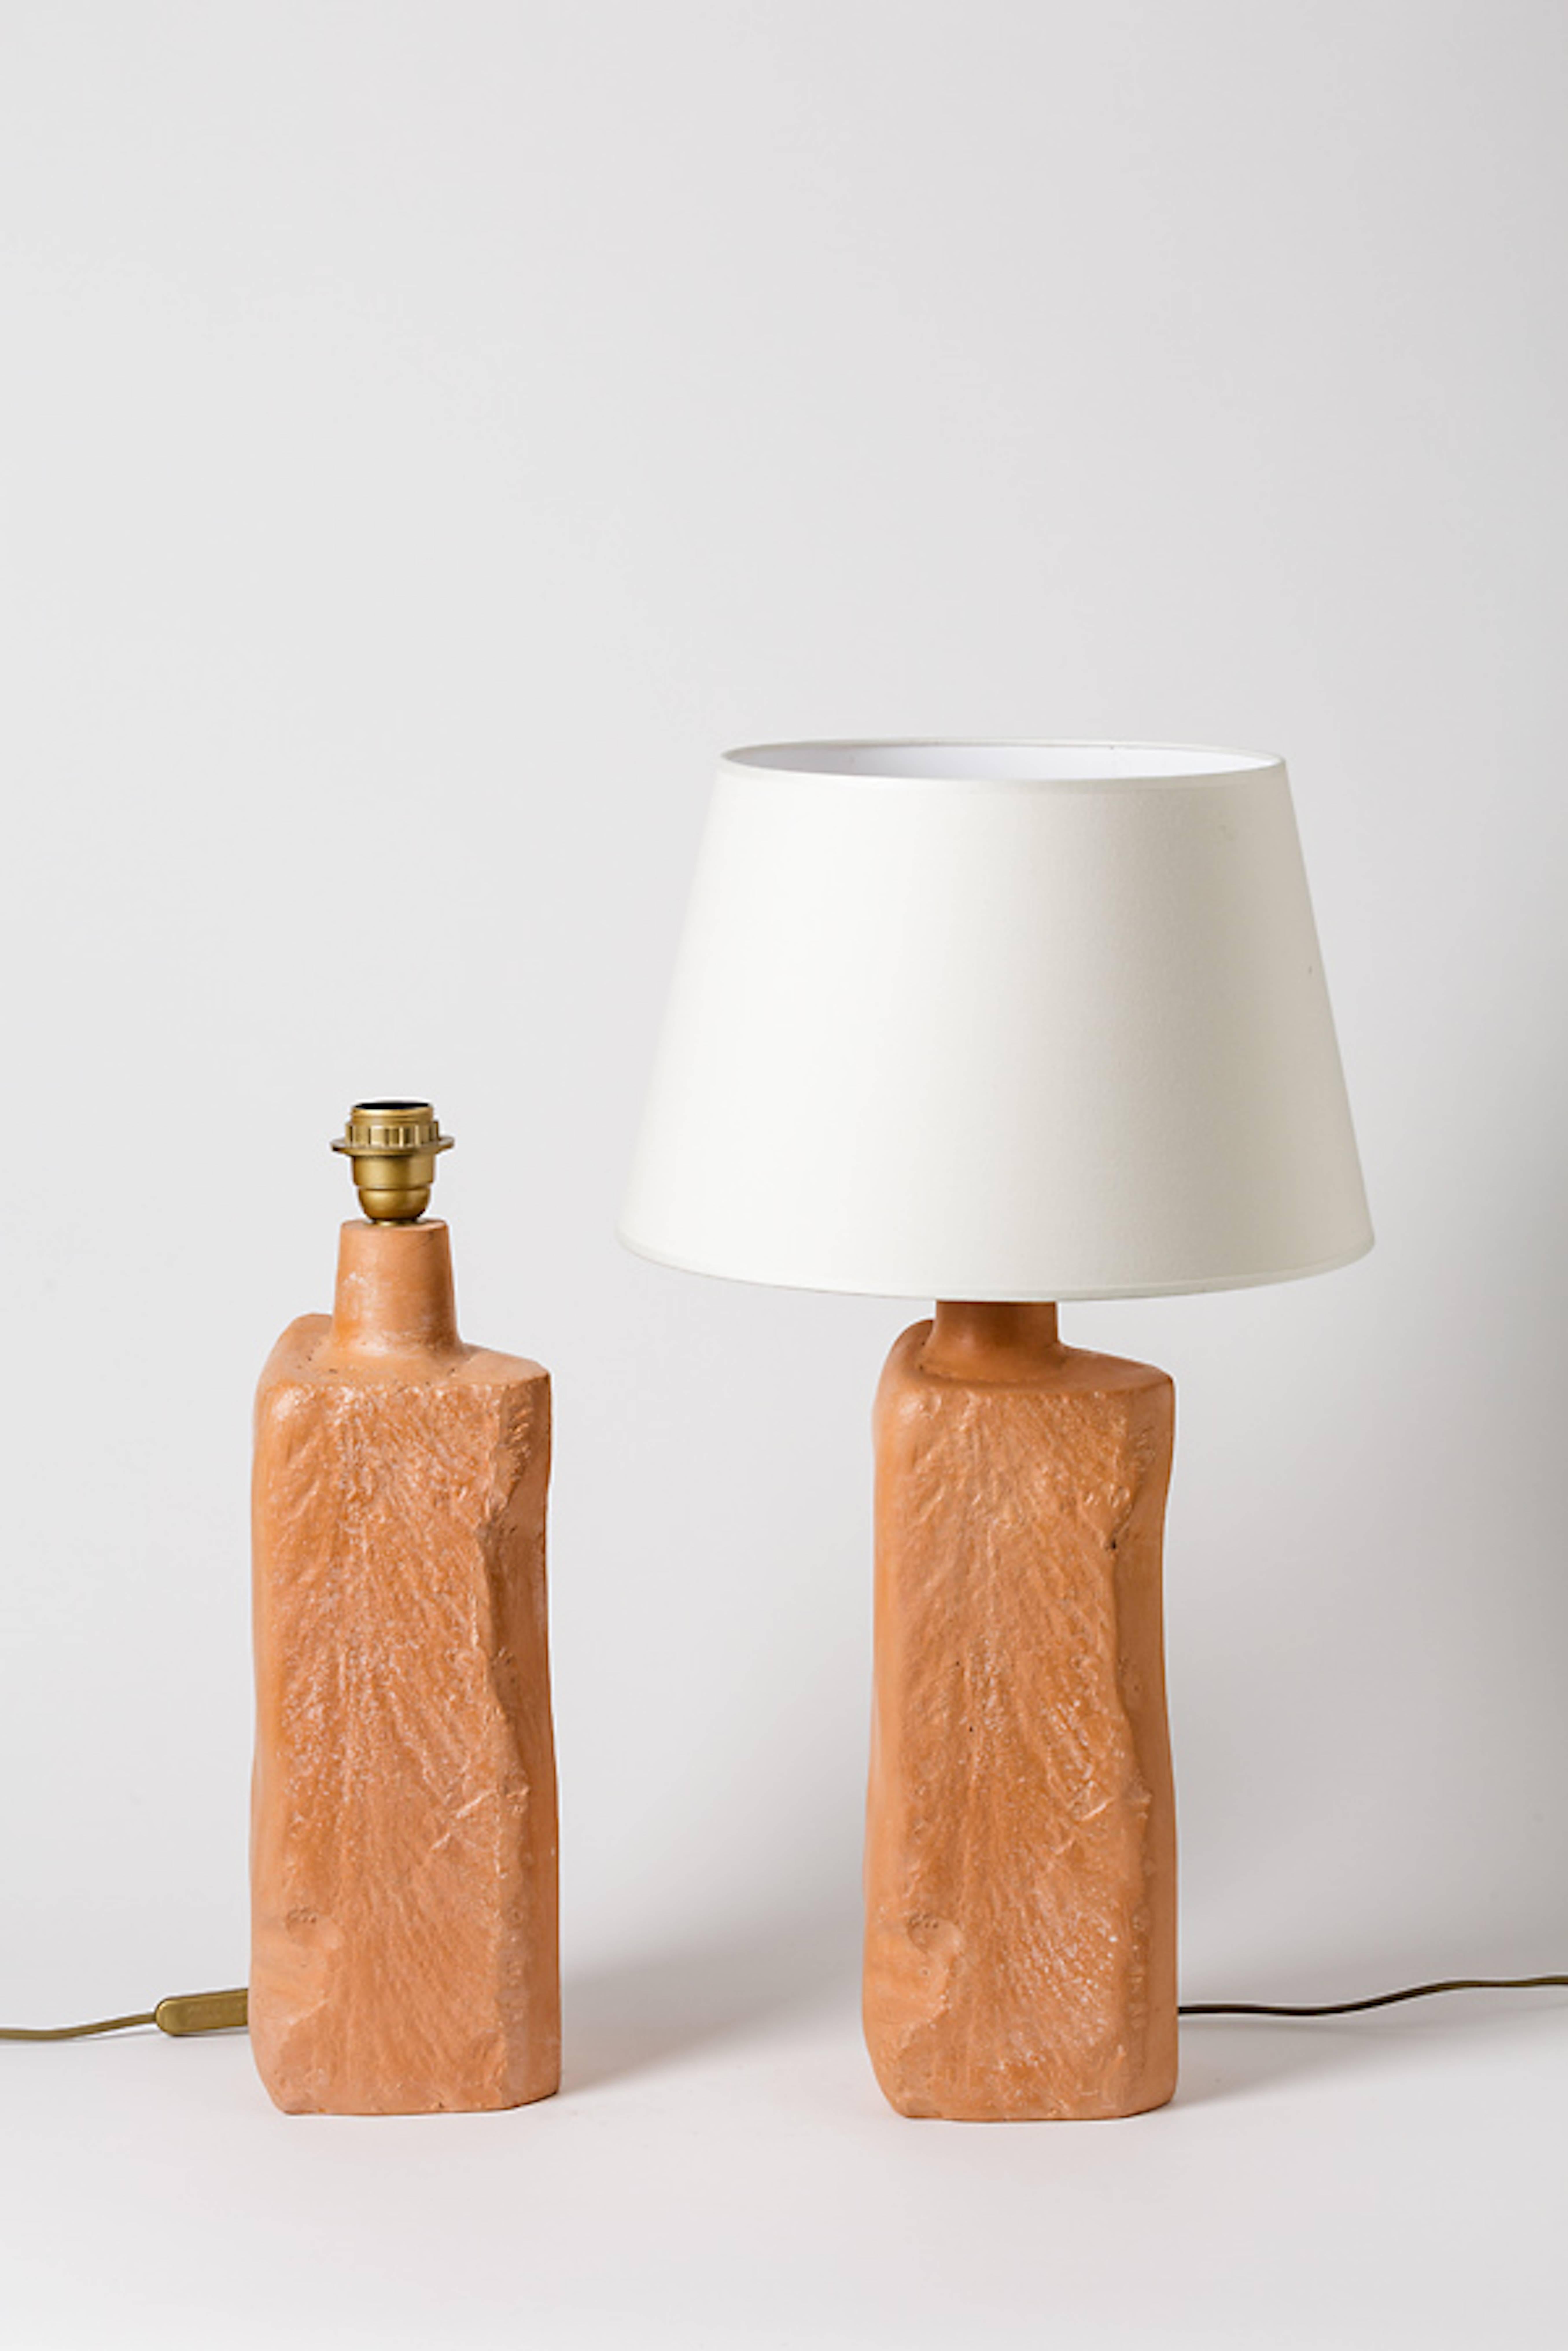 An elegant pair of ceramic lamps by Tim Orr.
Perfect original conditions.
Signed 